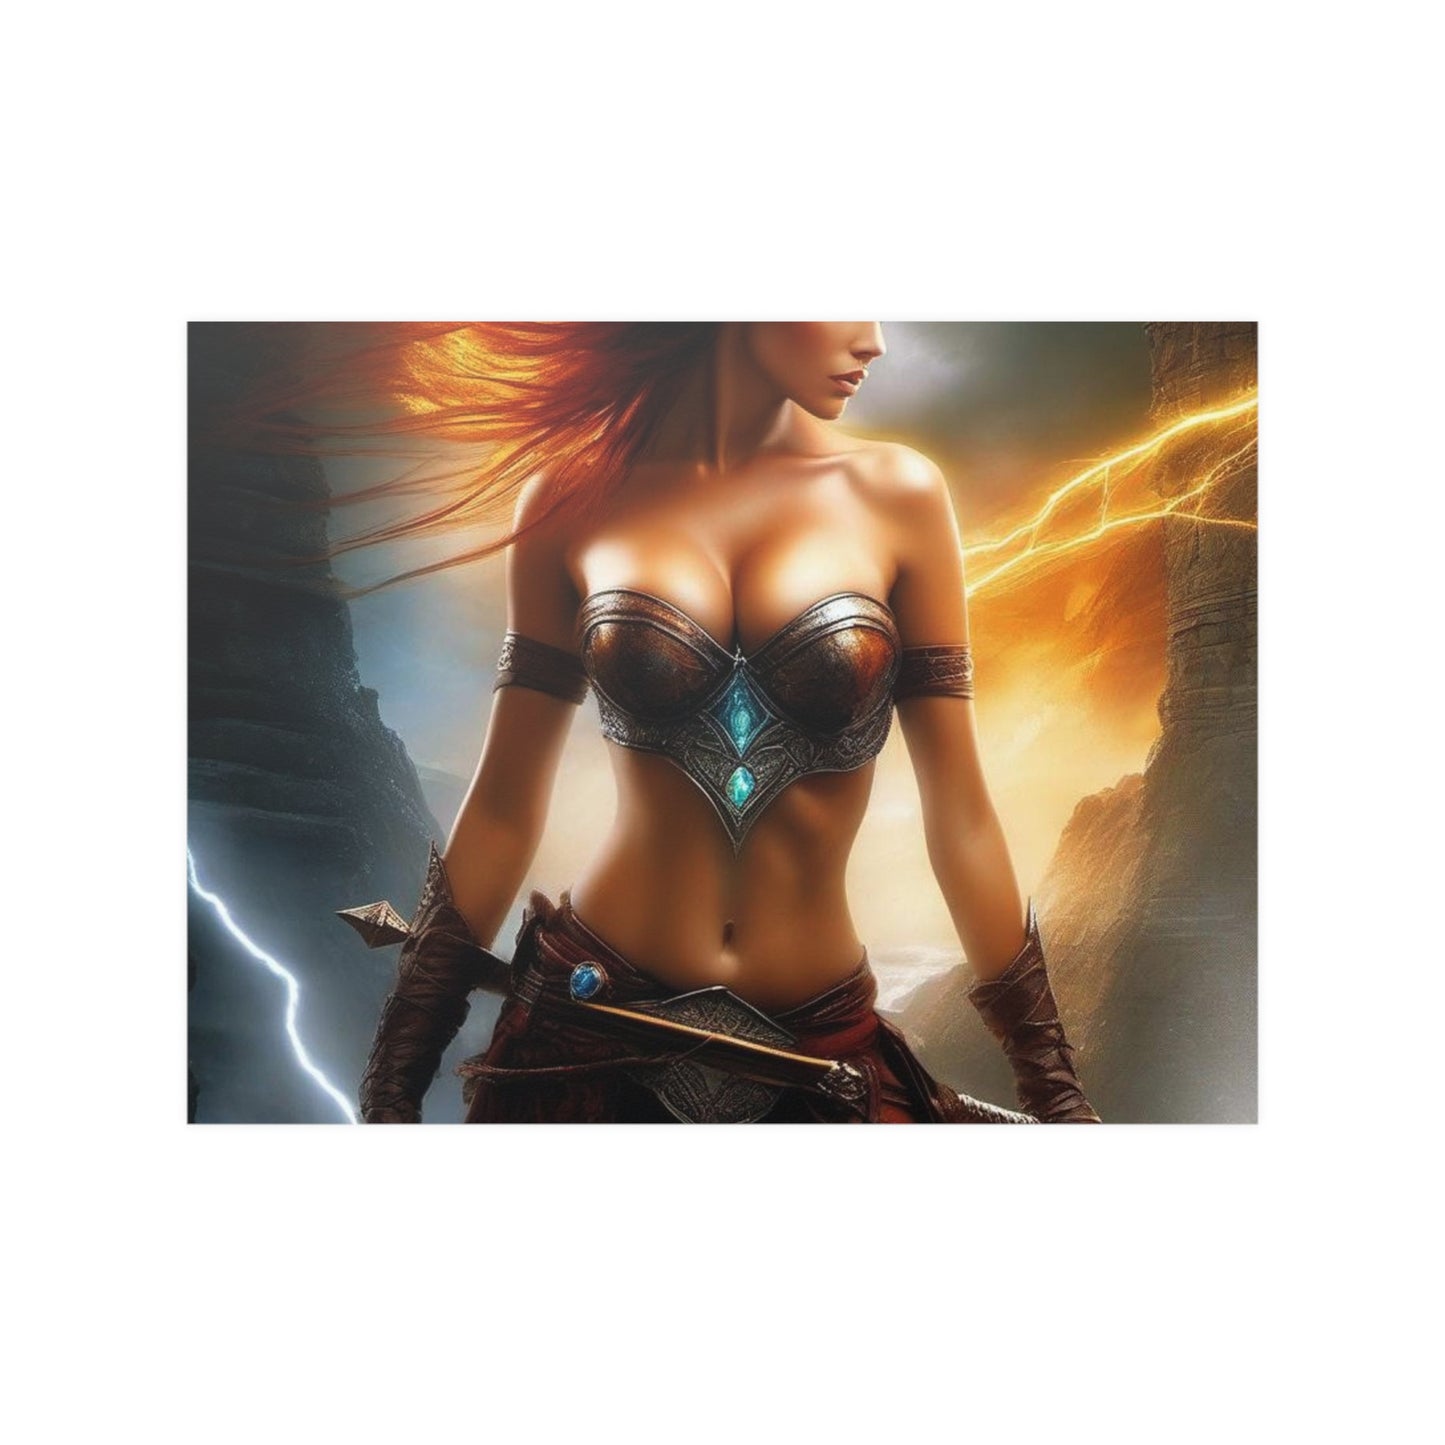 Lighting winged Warrior Satin Posters (210gsm)